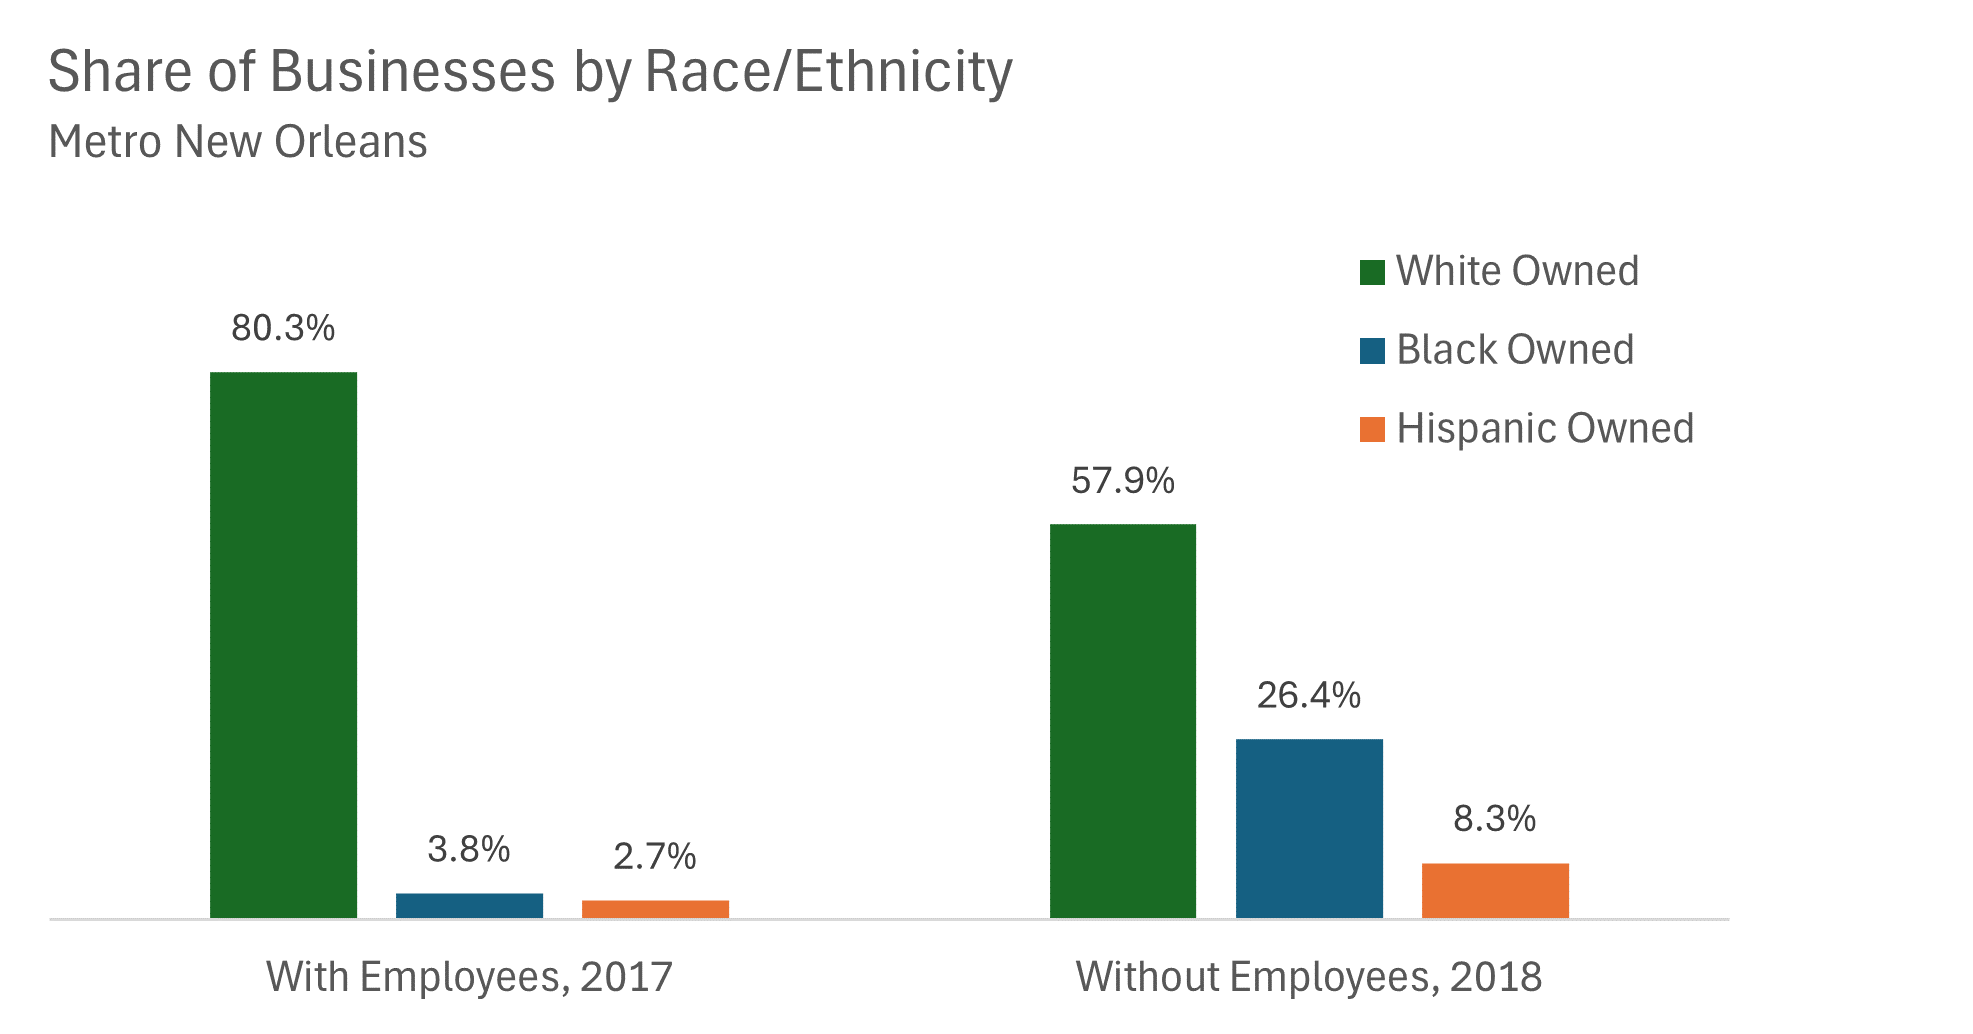 Share of Businesses by Race/Ethnicity